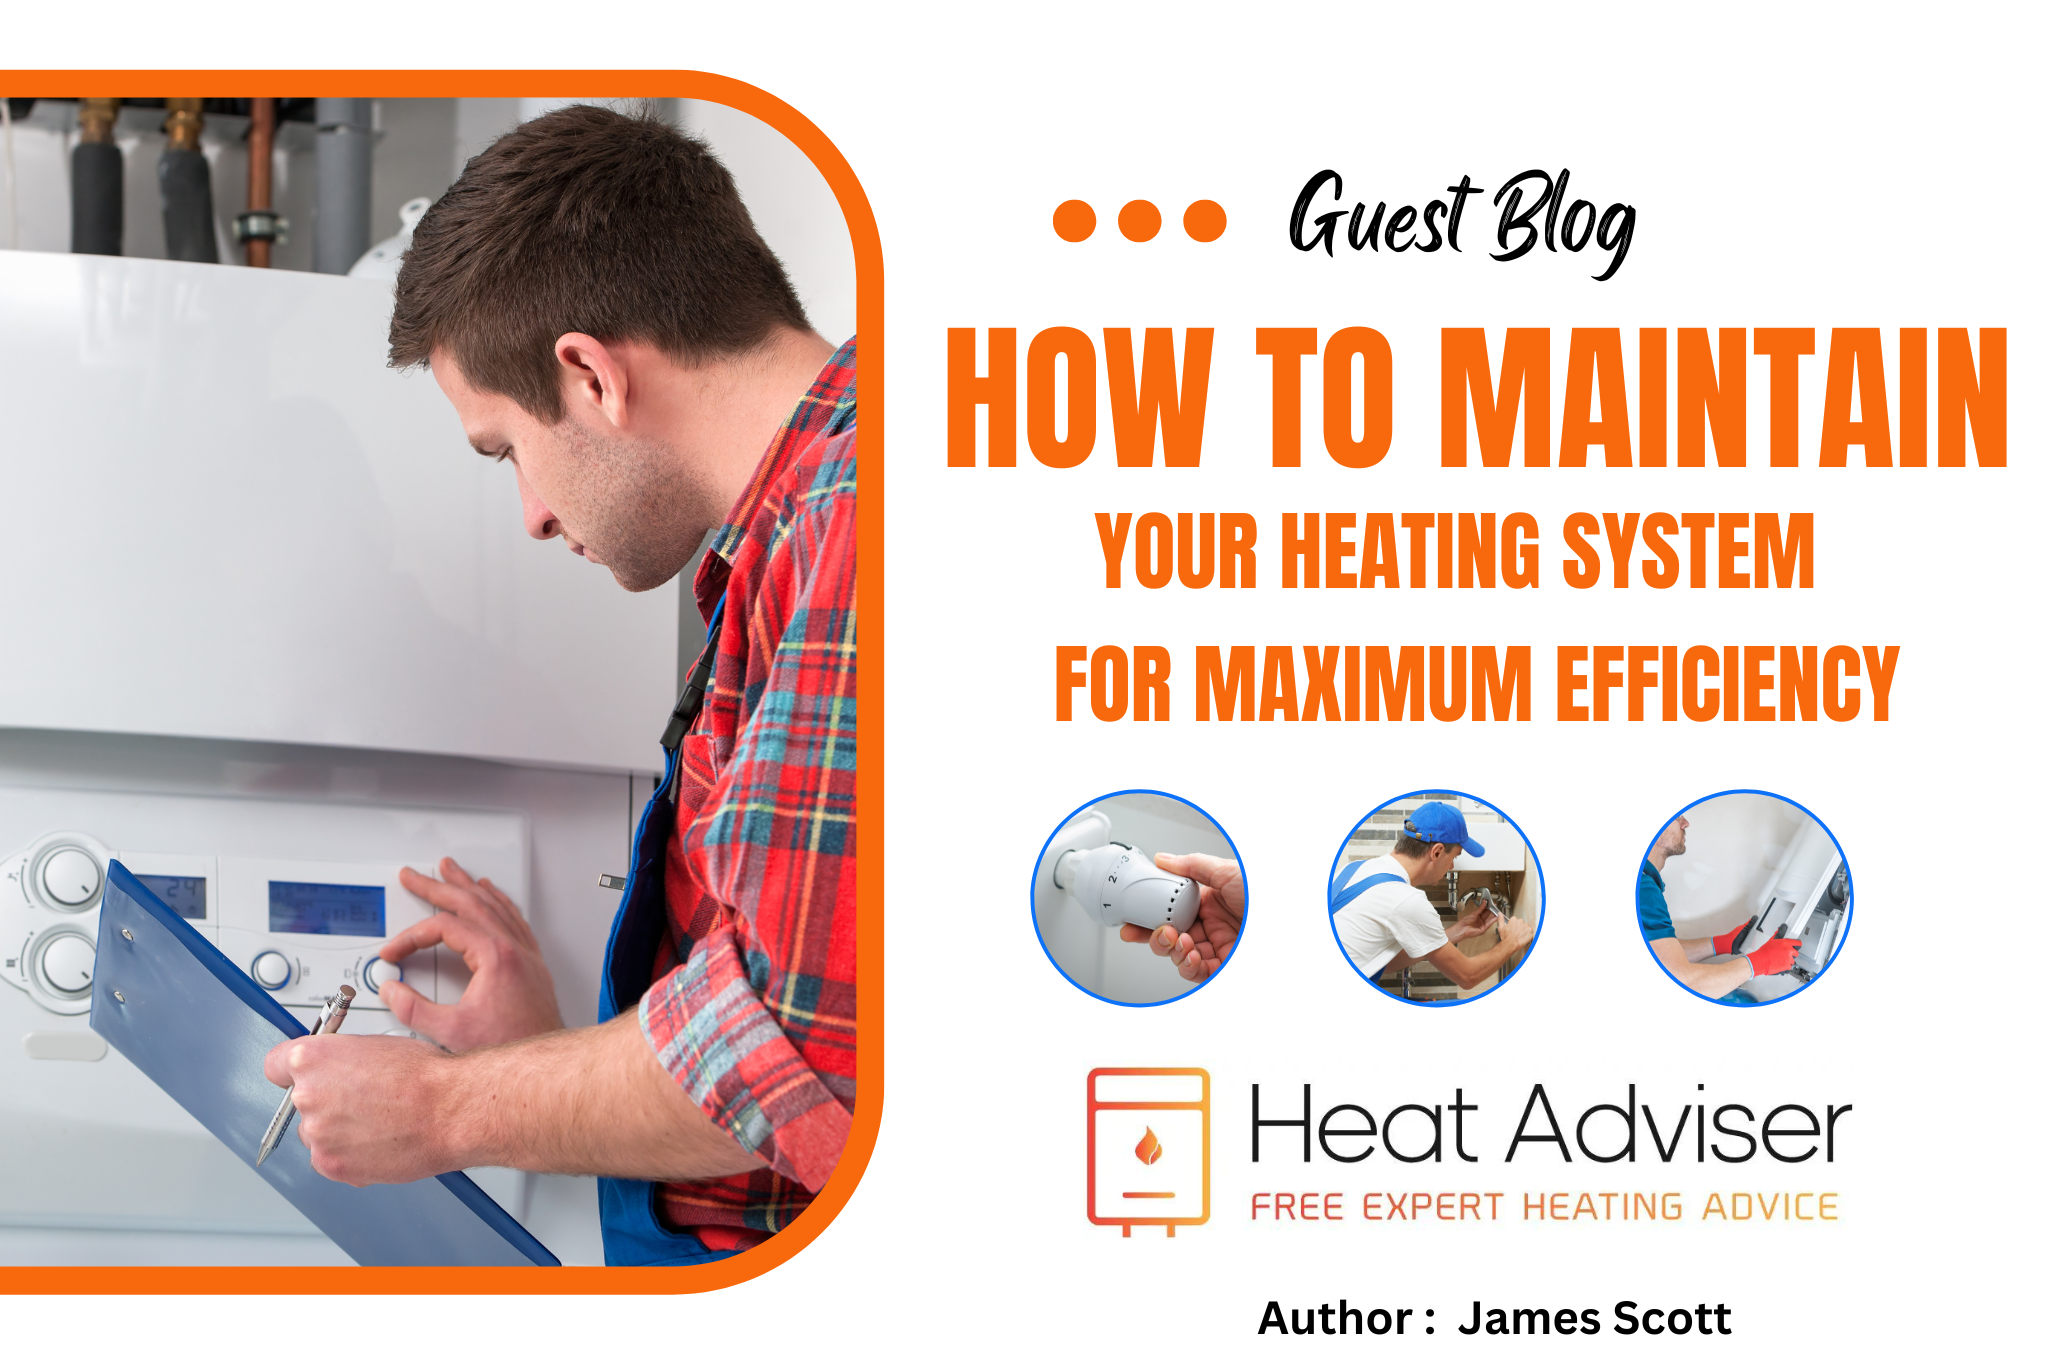 How To Maintain Your Heating System For Maximum Efficiency